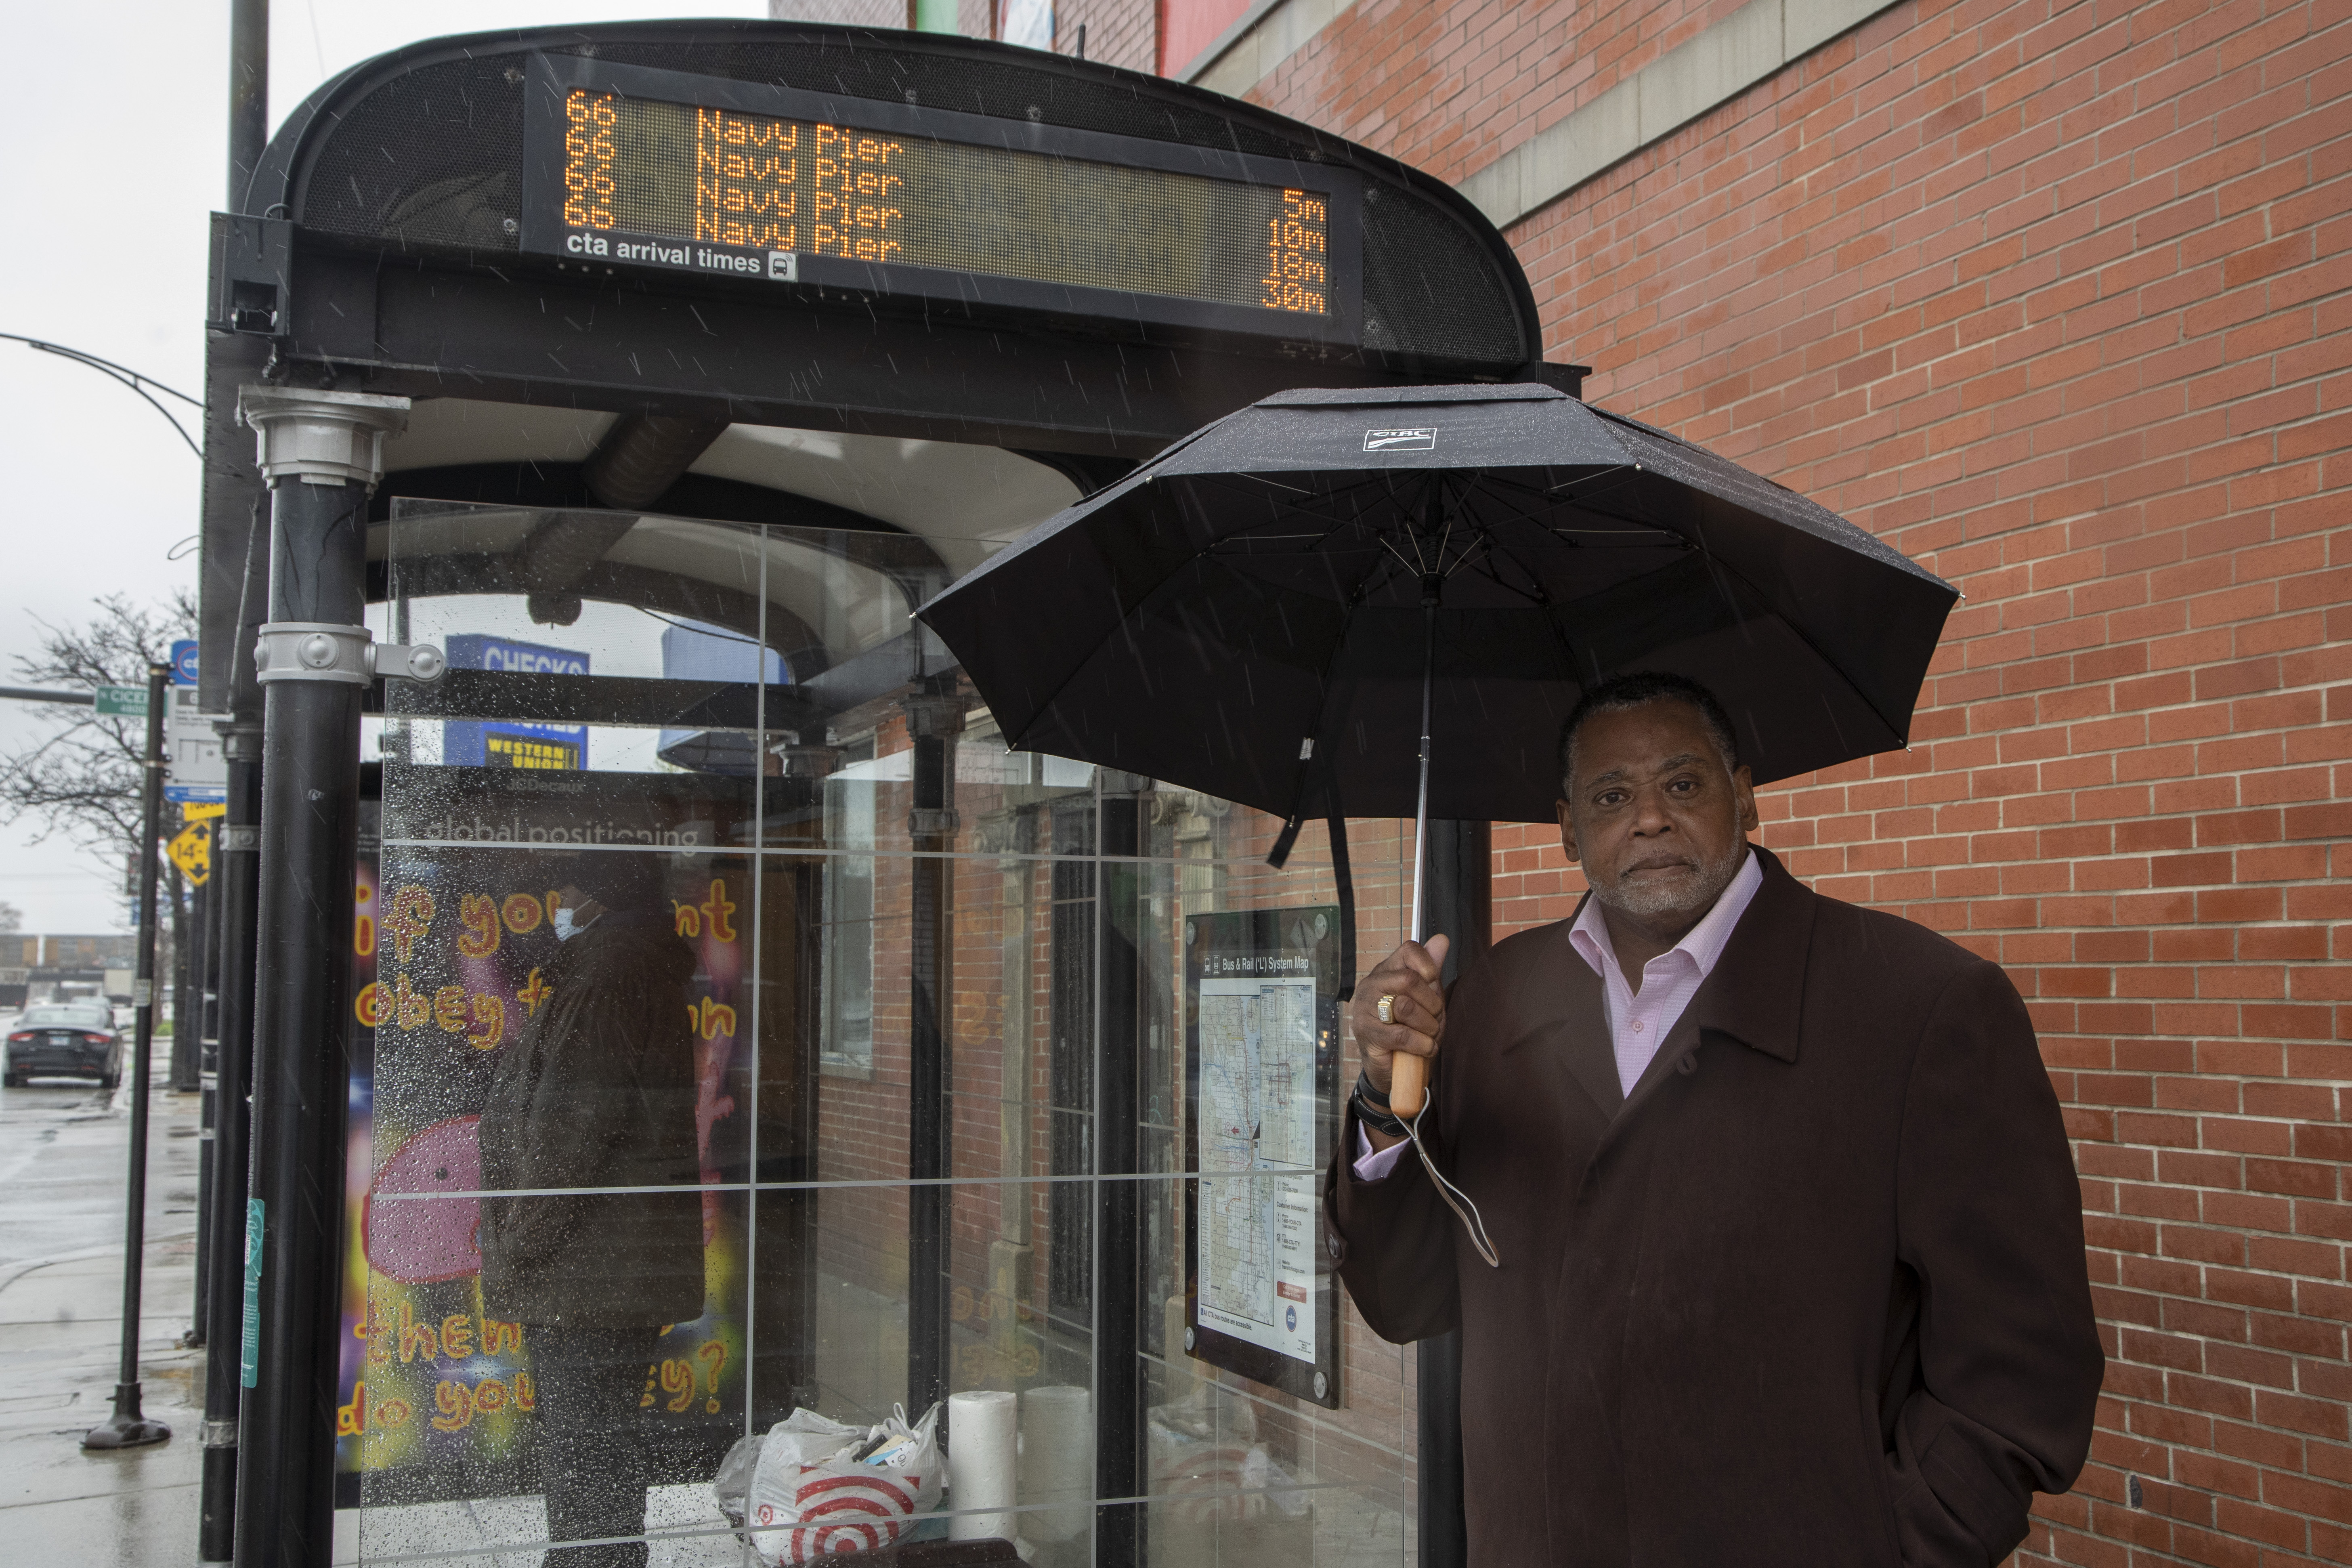 The Rev. Joseph Kyles, who has been pastor at The Promise Church of Chicago for 17 years, stands at the bus stop at Chicago and Cicero in Austin.